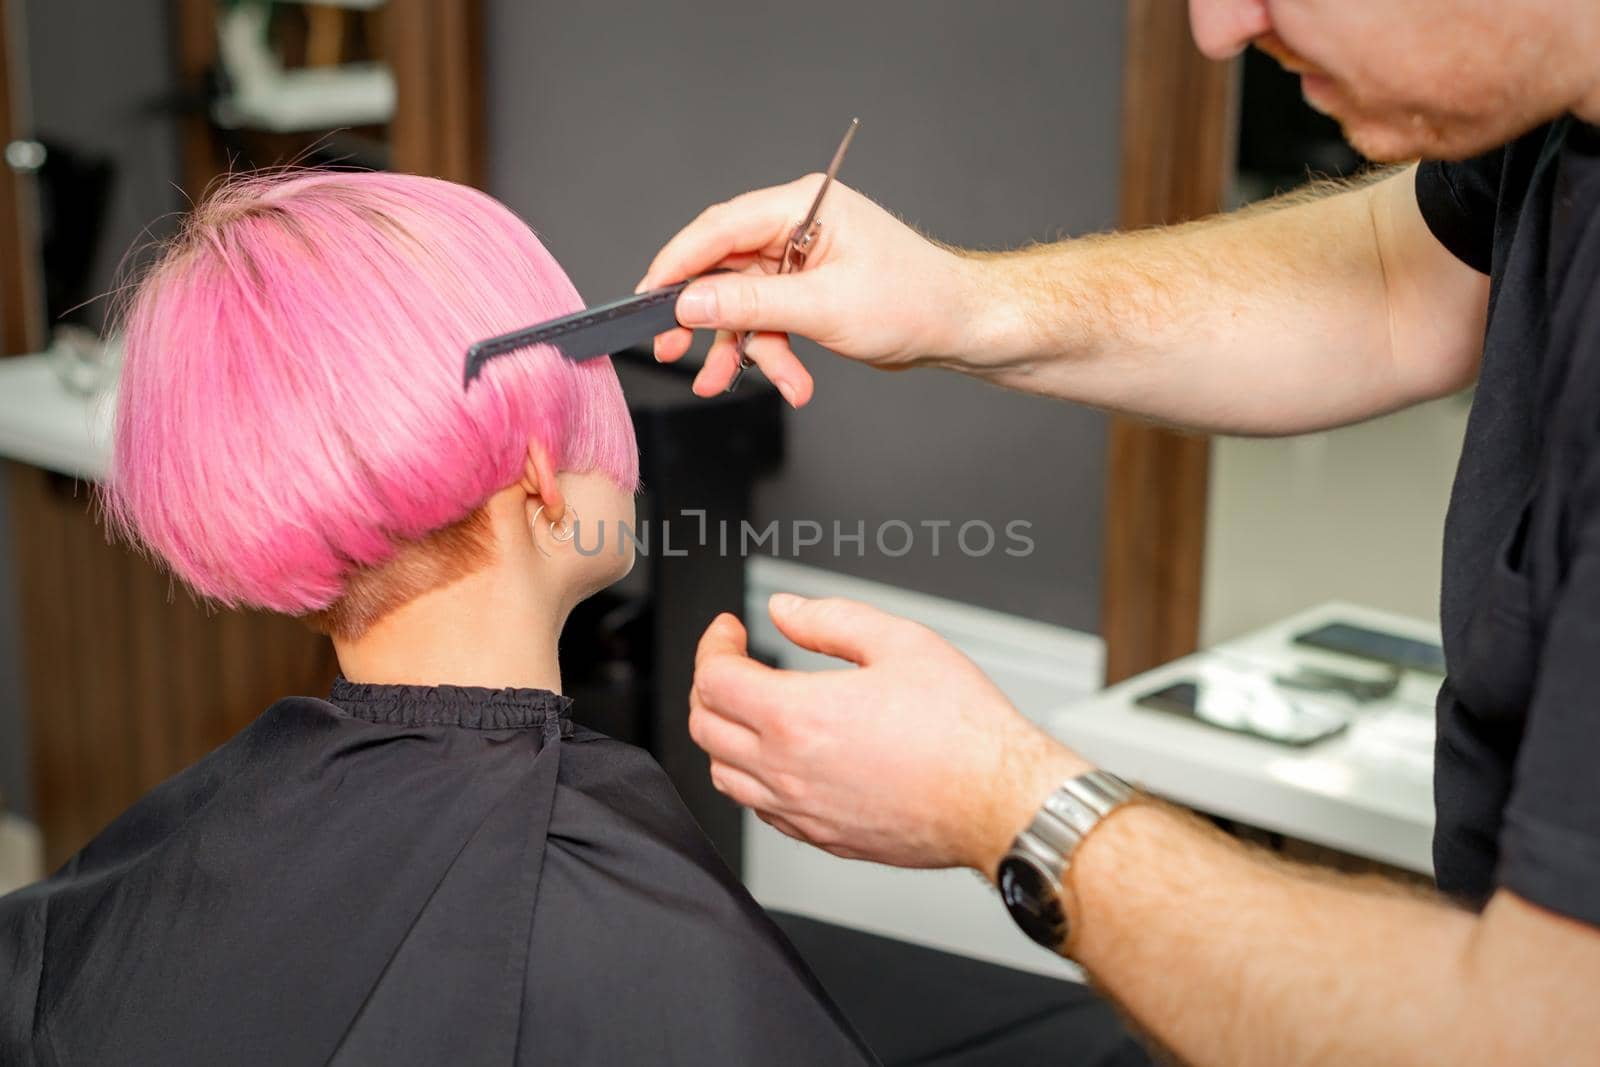 Hands of hairdresser combing hair making short pink hairstyle for a young caucasian woman in a beauty salon. by okskukuruza